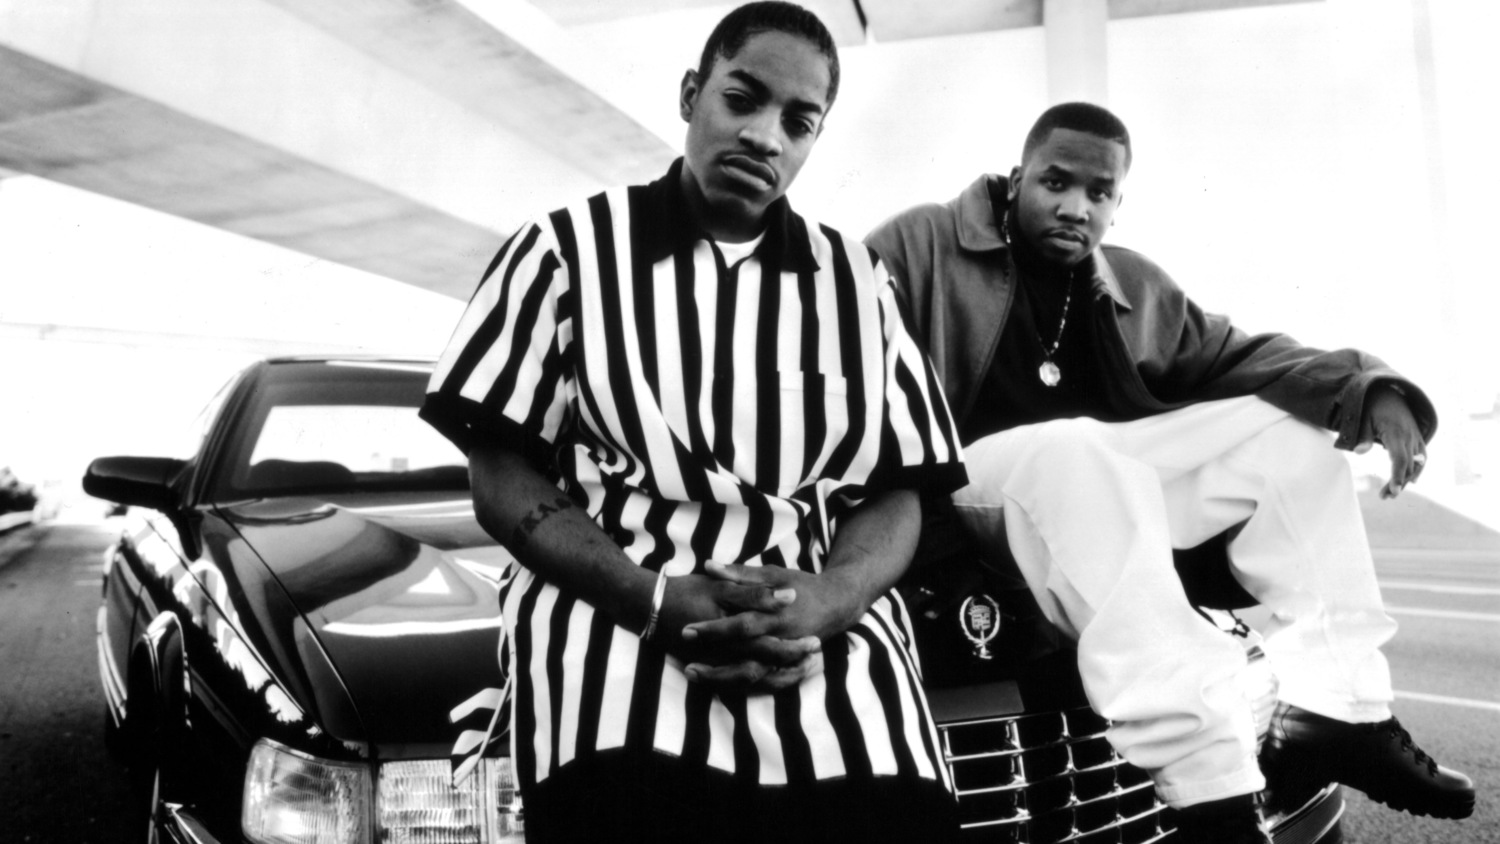 Thursday CarTune: Two Dope Boys (In a Cadillac) by Outkast